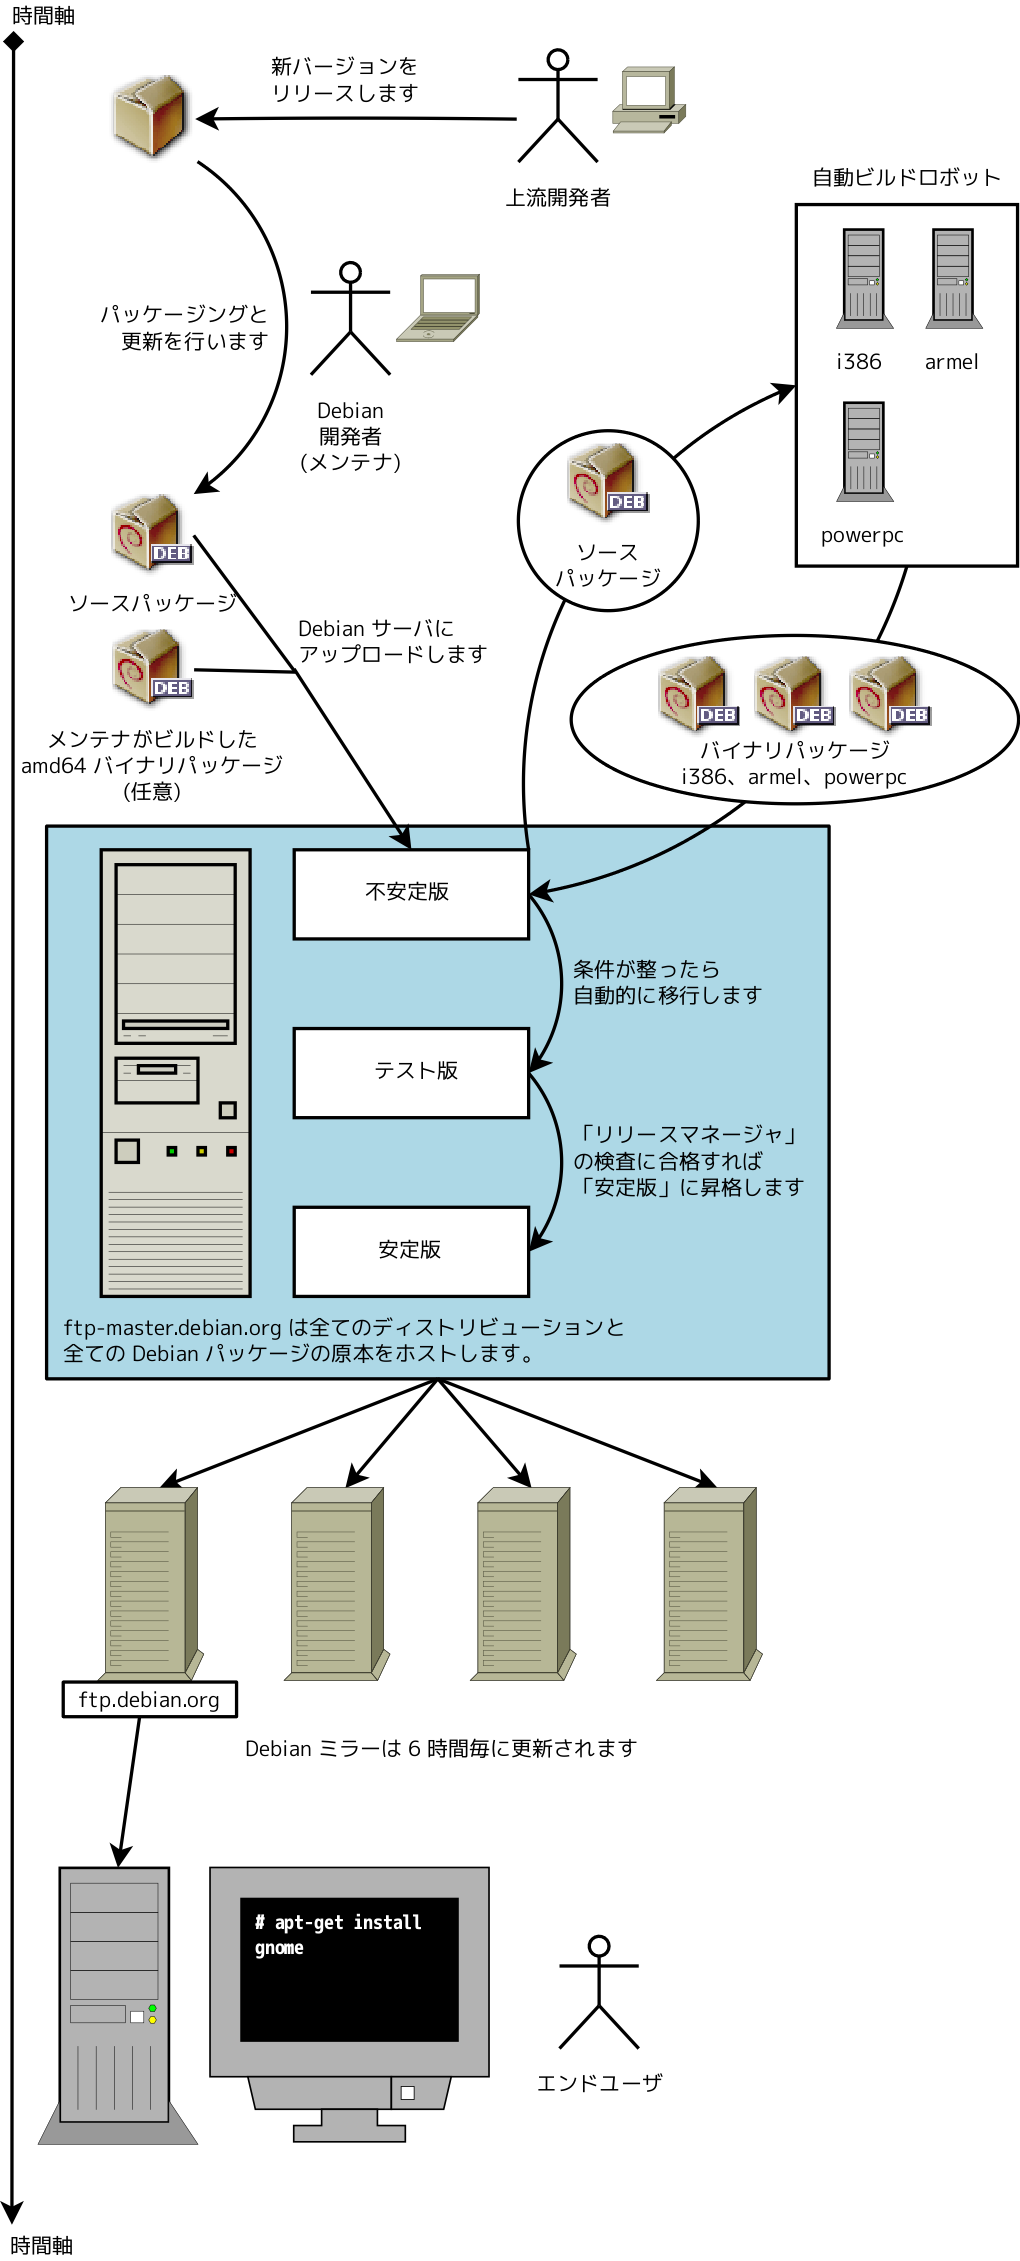 ../../html/ja-JP/images/package-lifecycle.png